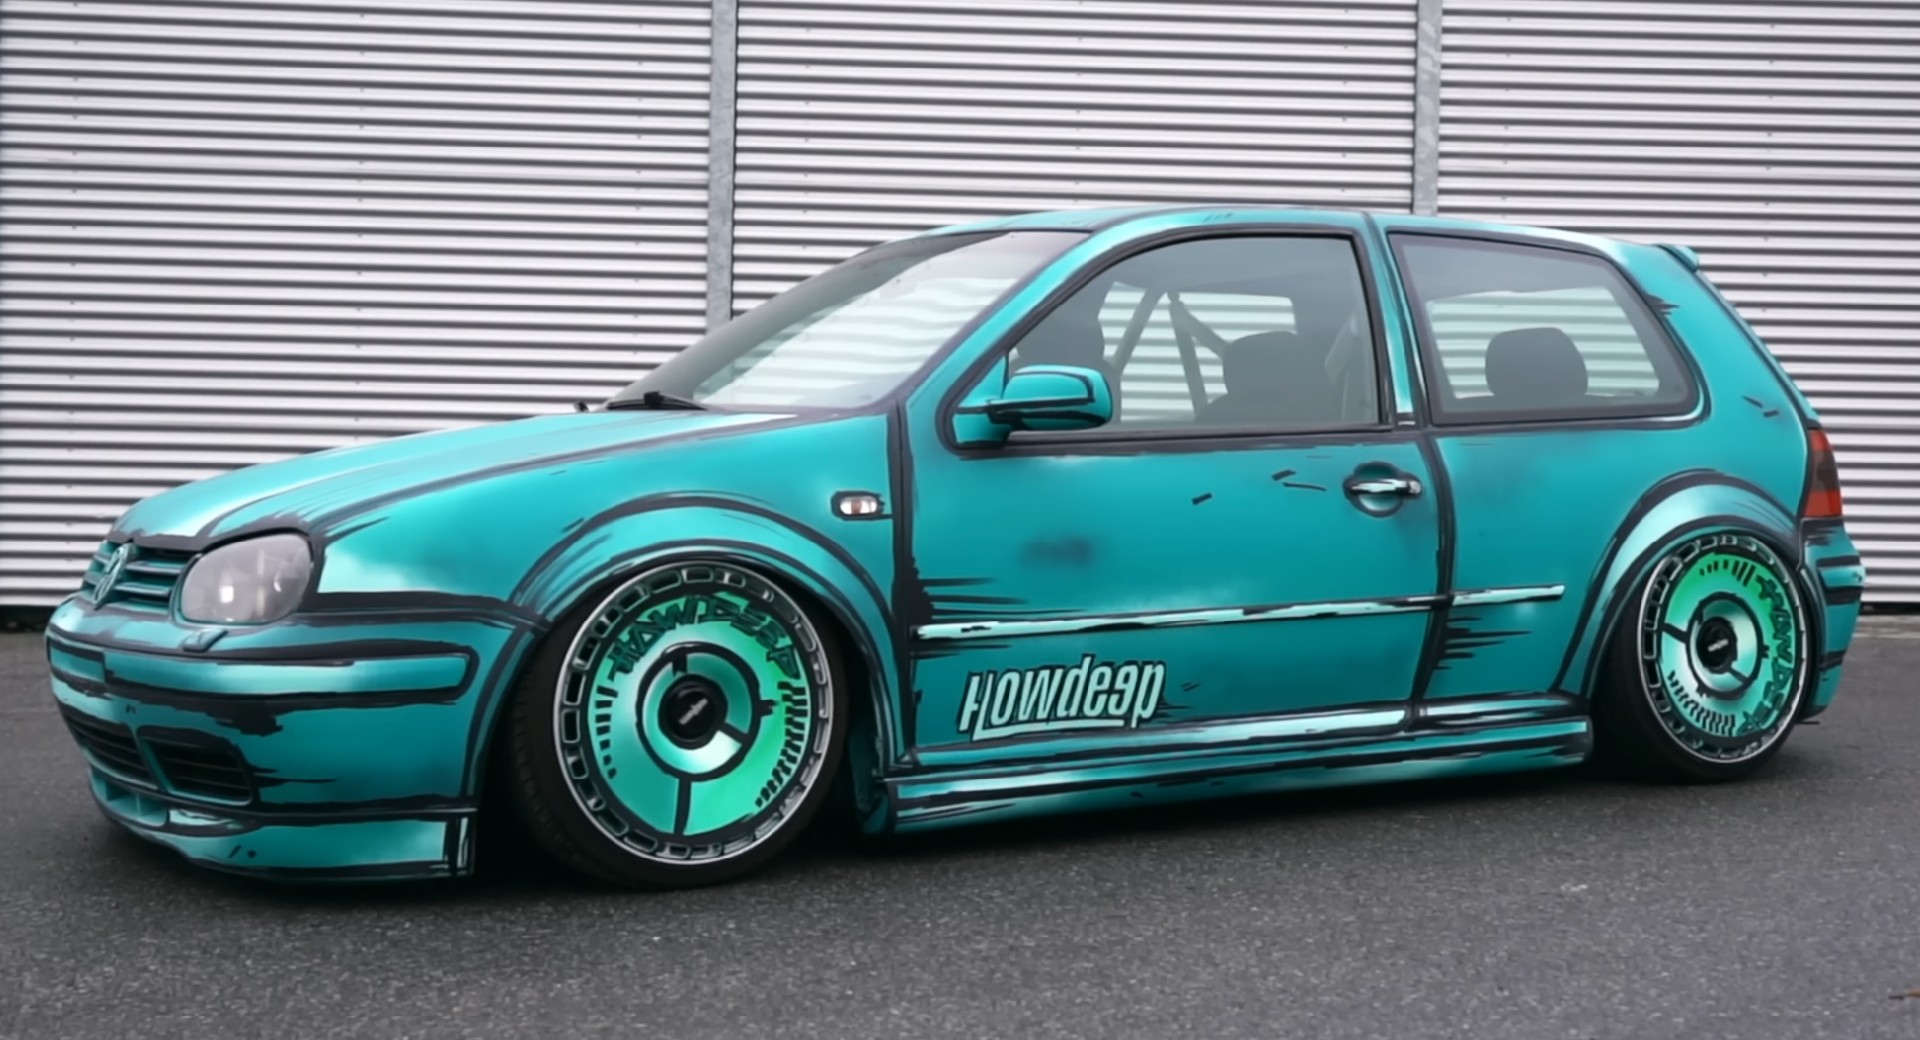 Volkswagen golf mk4 gti with custom modifications on Craiyon